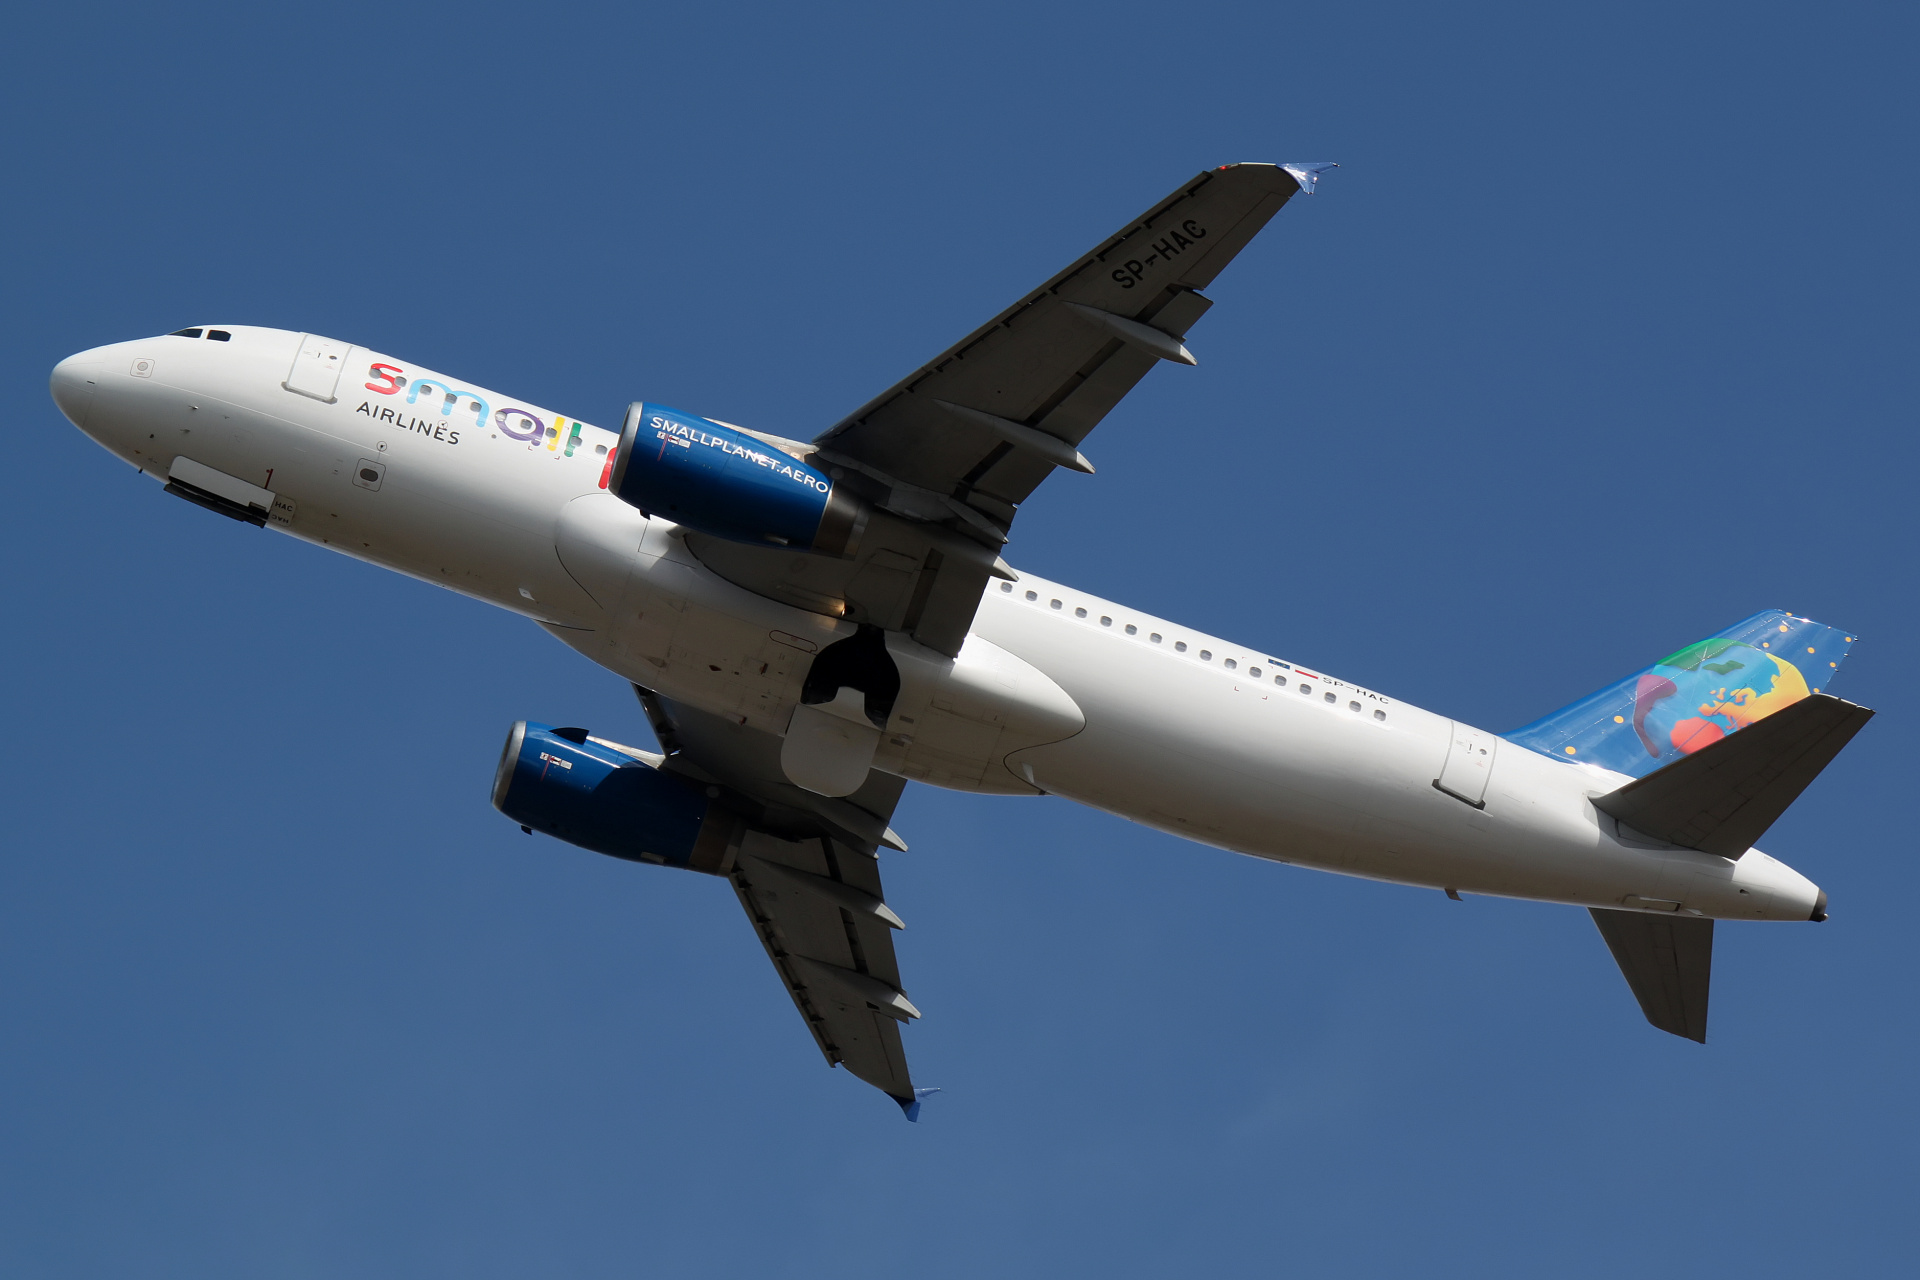 SP-HAC (Aircraft » EPWA Spotting » Airbus A320-200 » Small Planet Airlines)